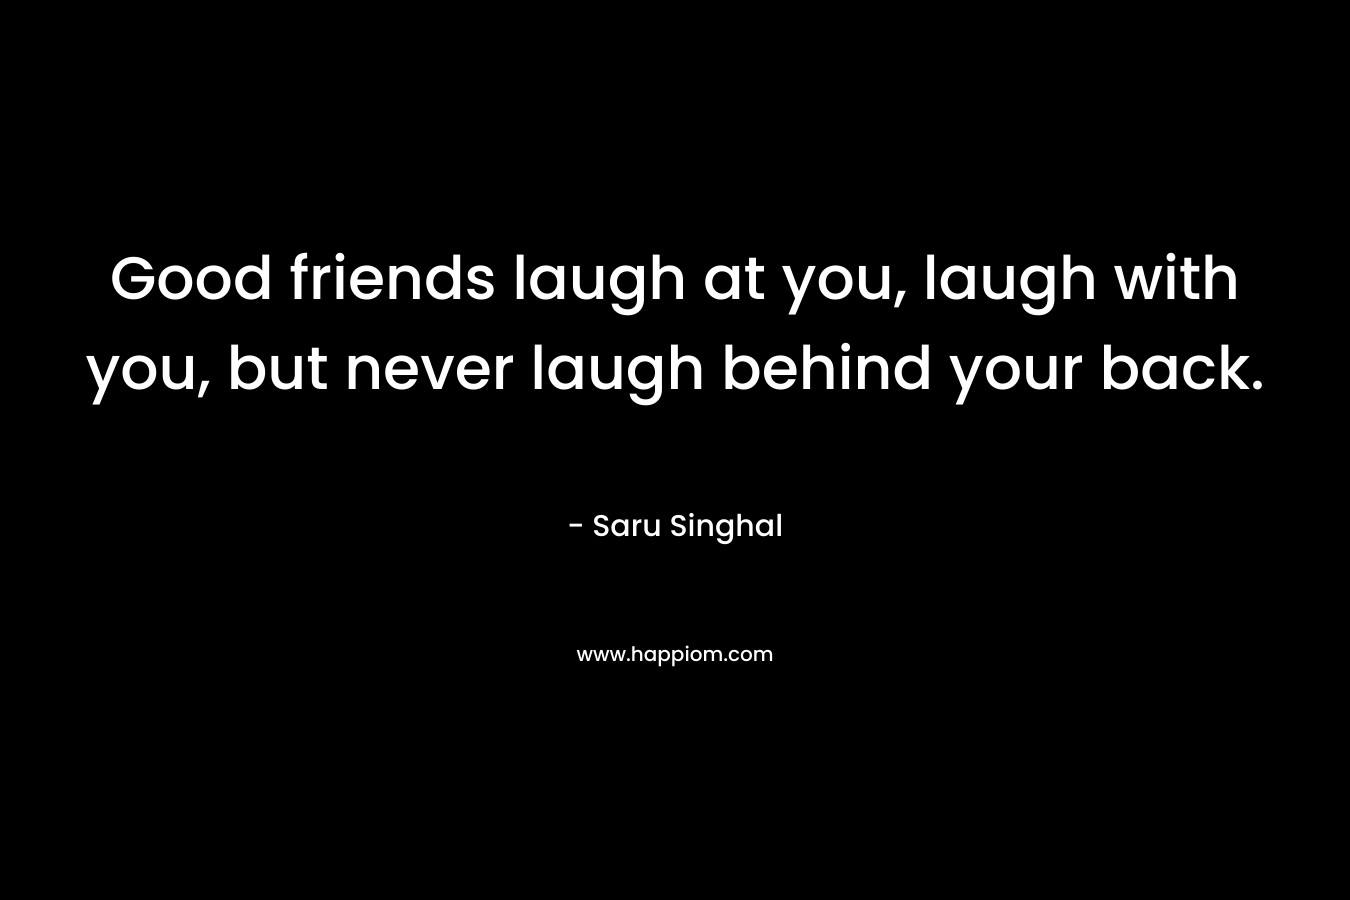 Good friends laugh at you, laugh with you, but never laugh behind your back.